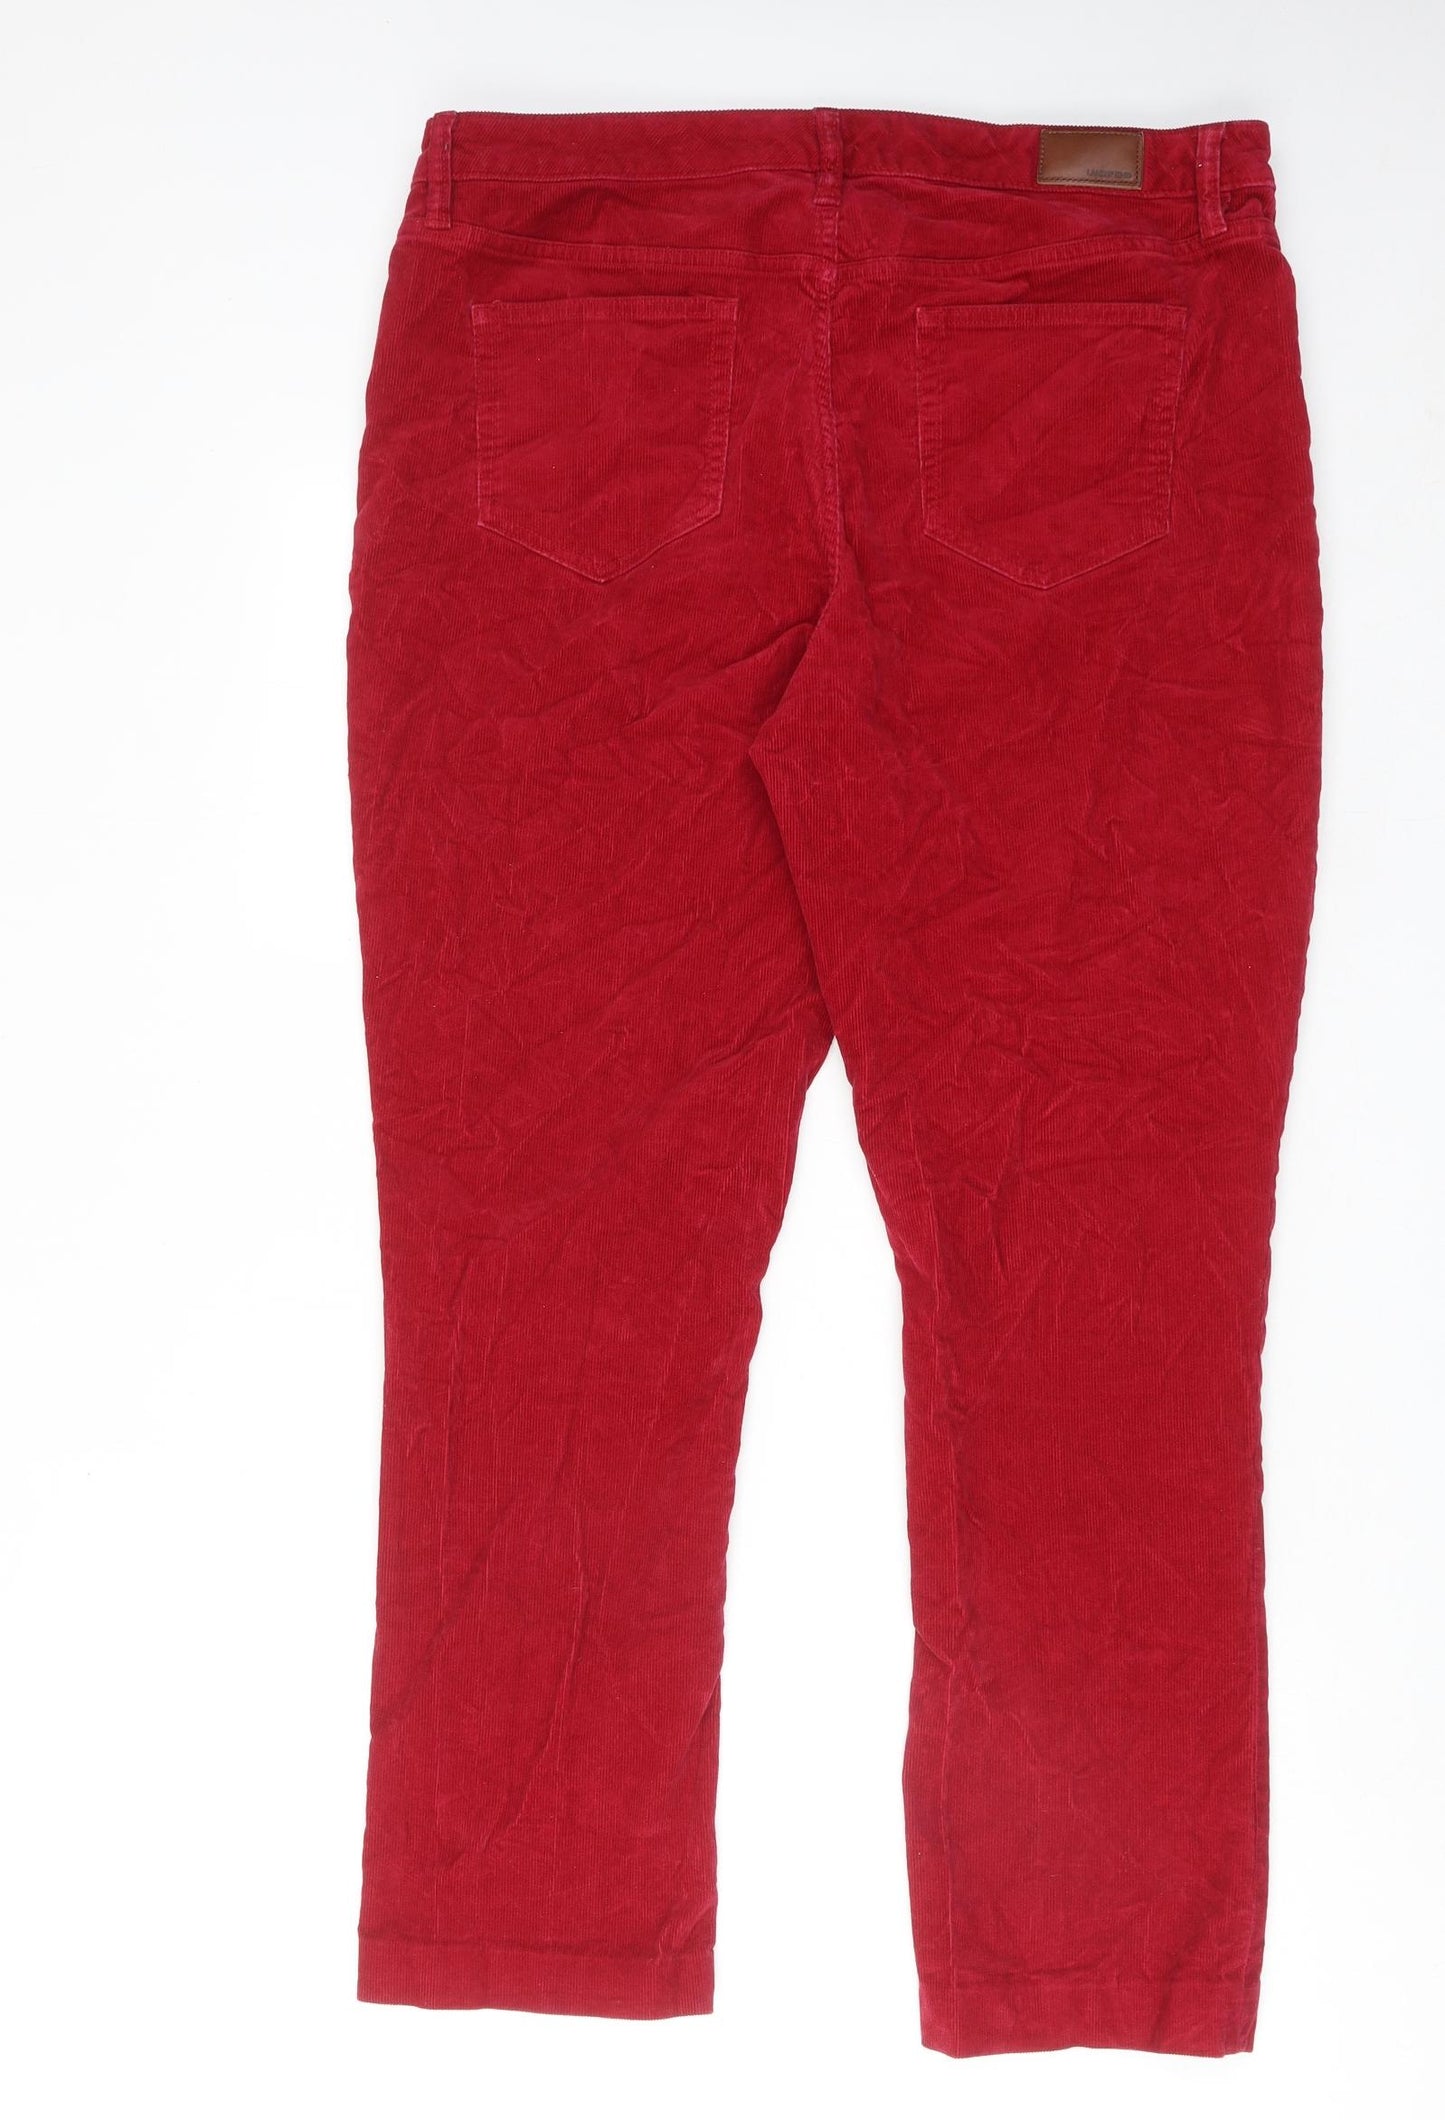 Lands' End Womens Red Cotton Trousers Size 18 Regular Zip